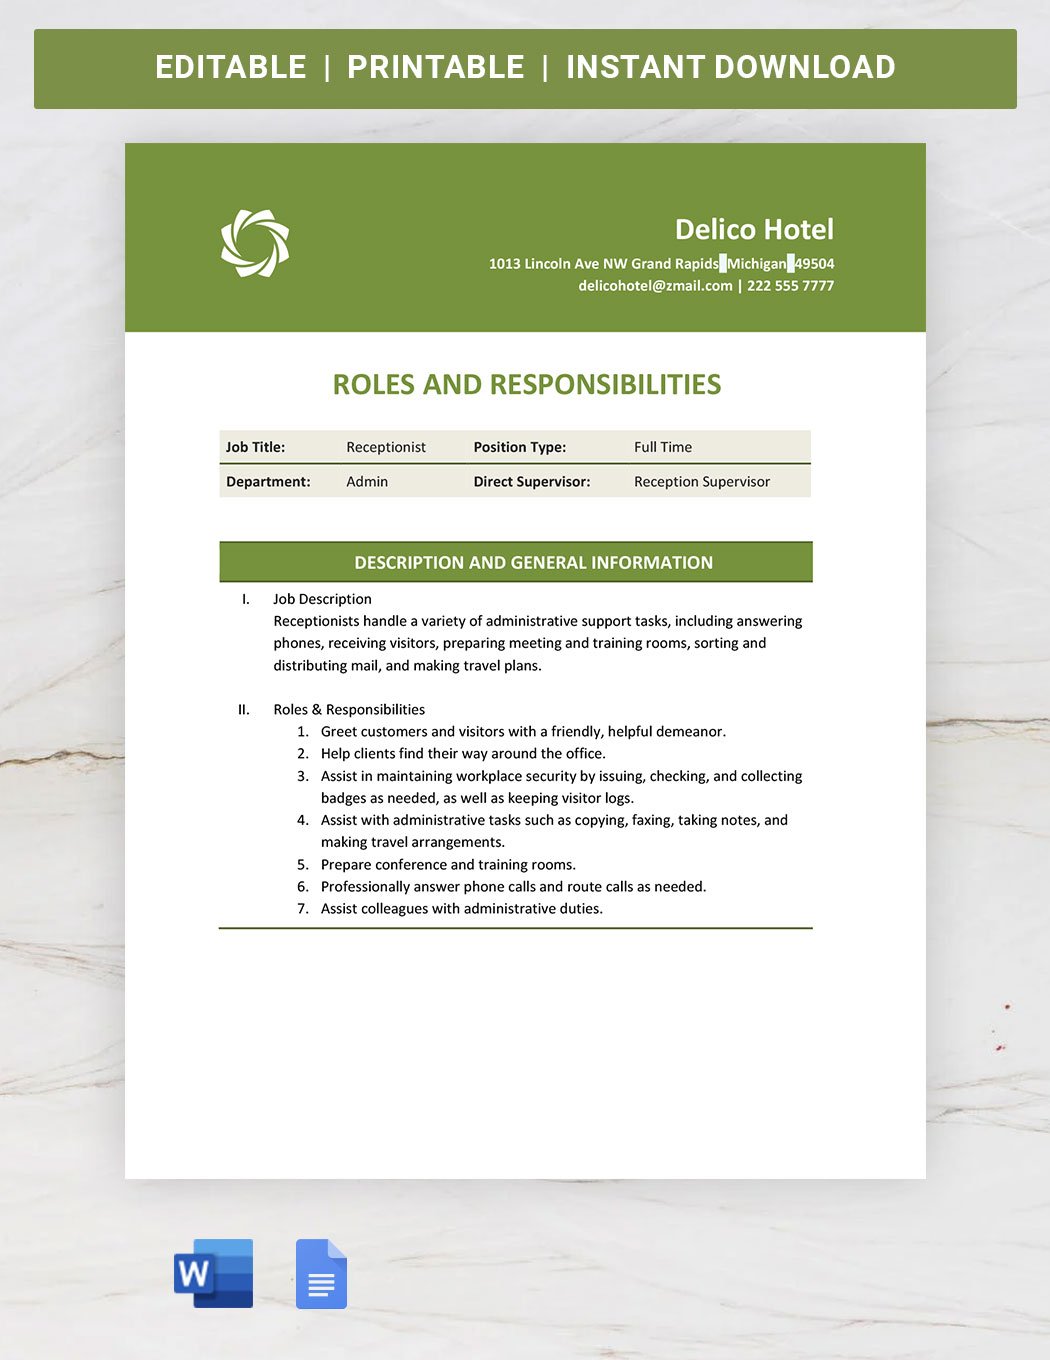 Business Roles And Responsibilities Template